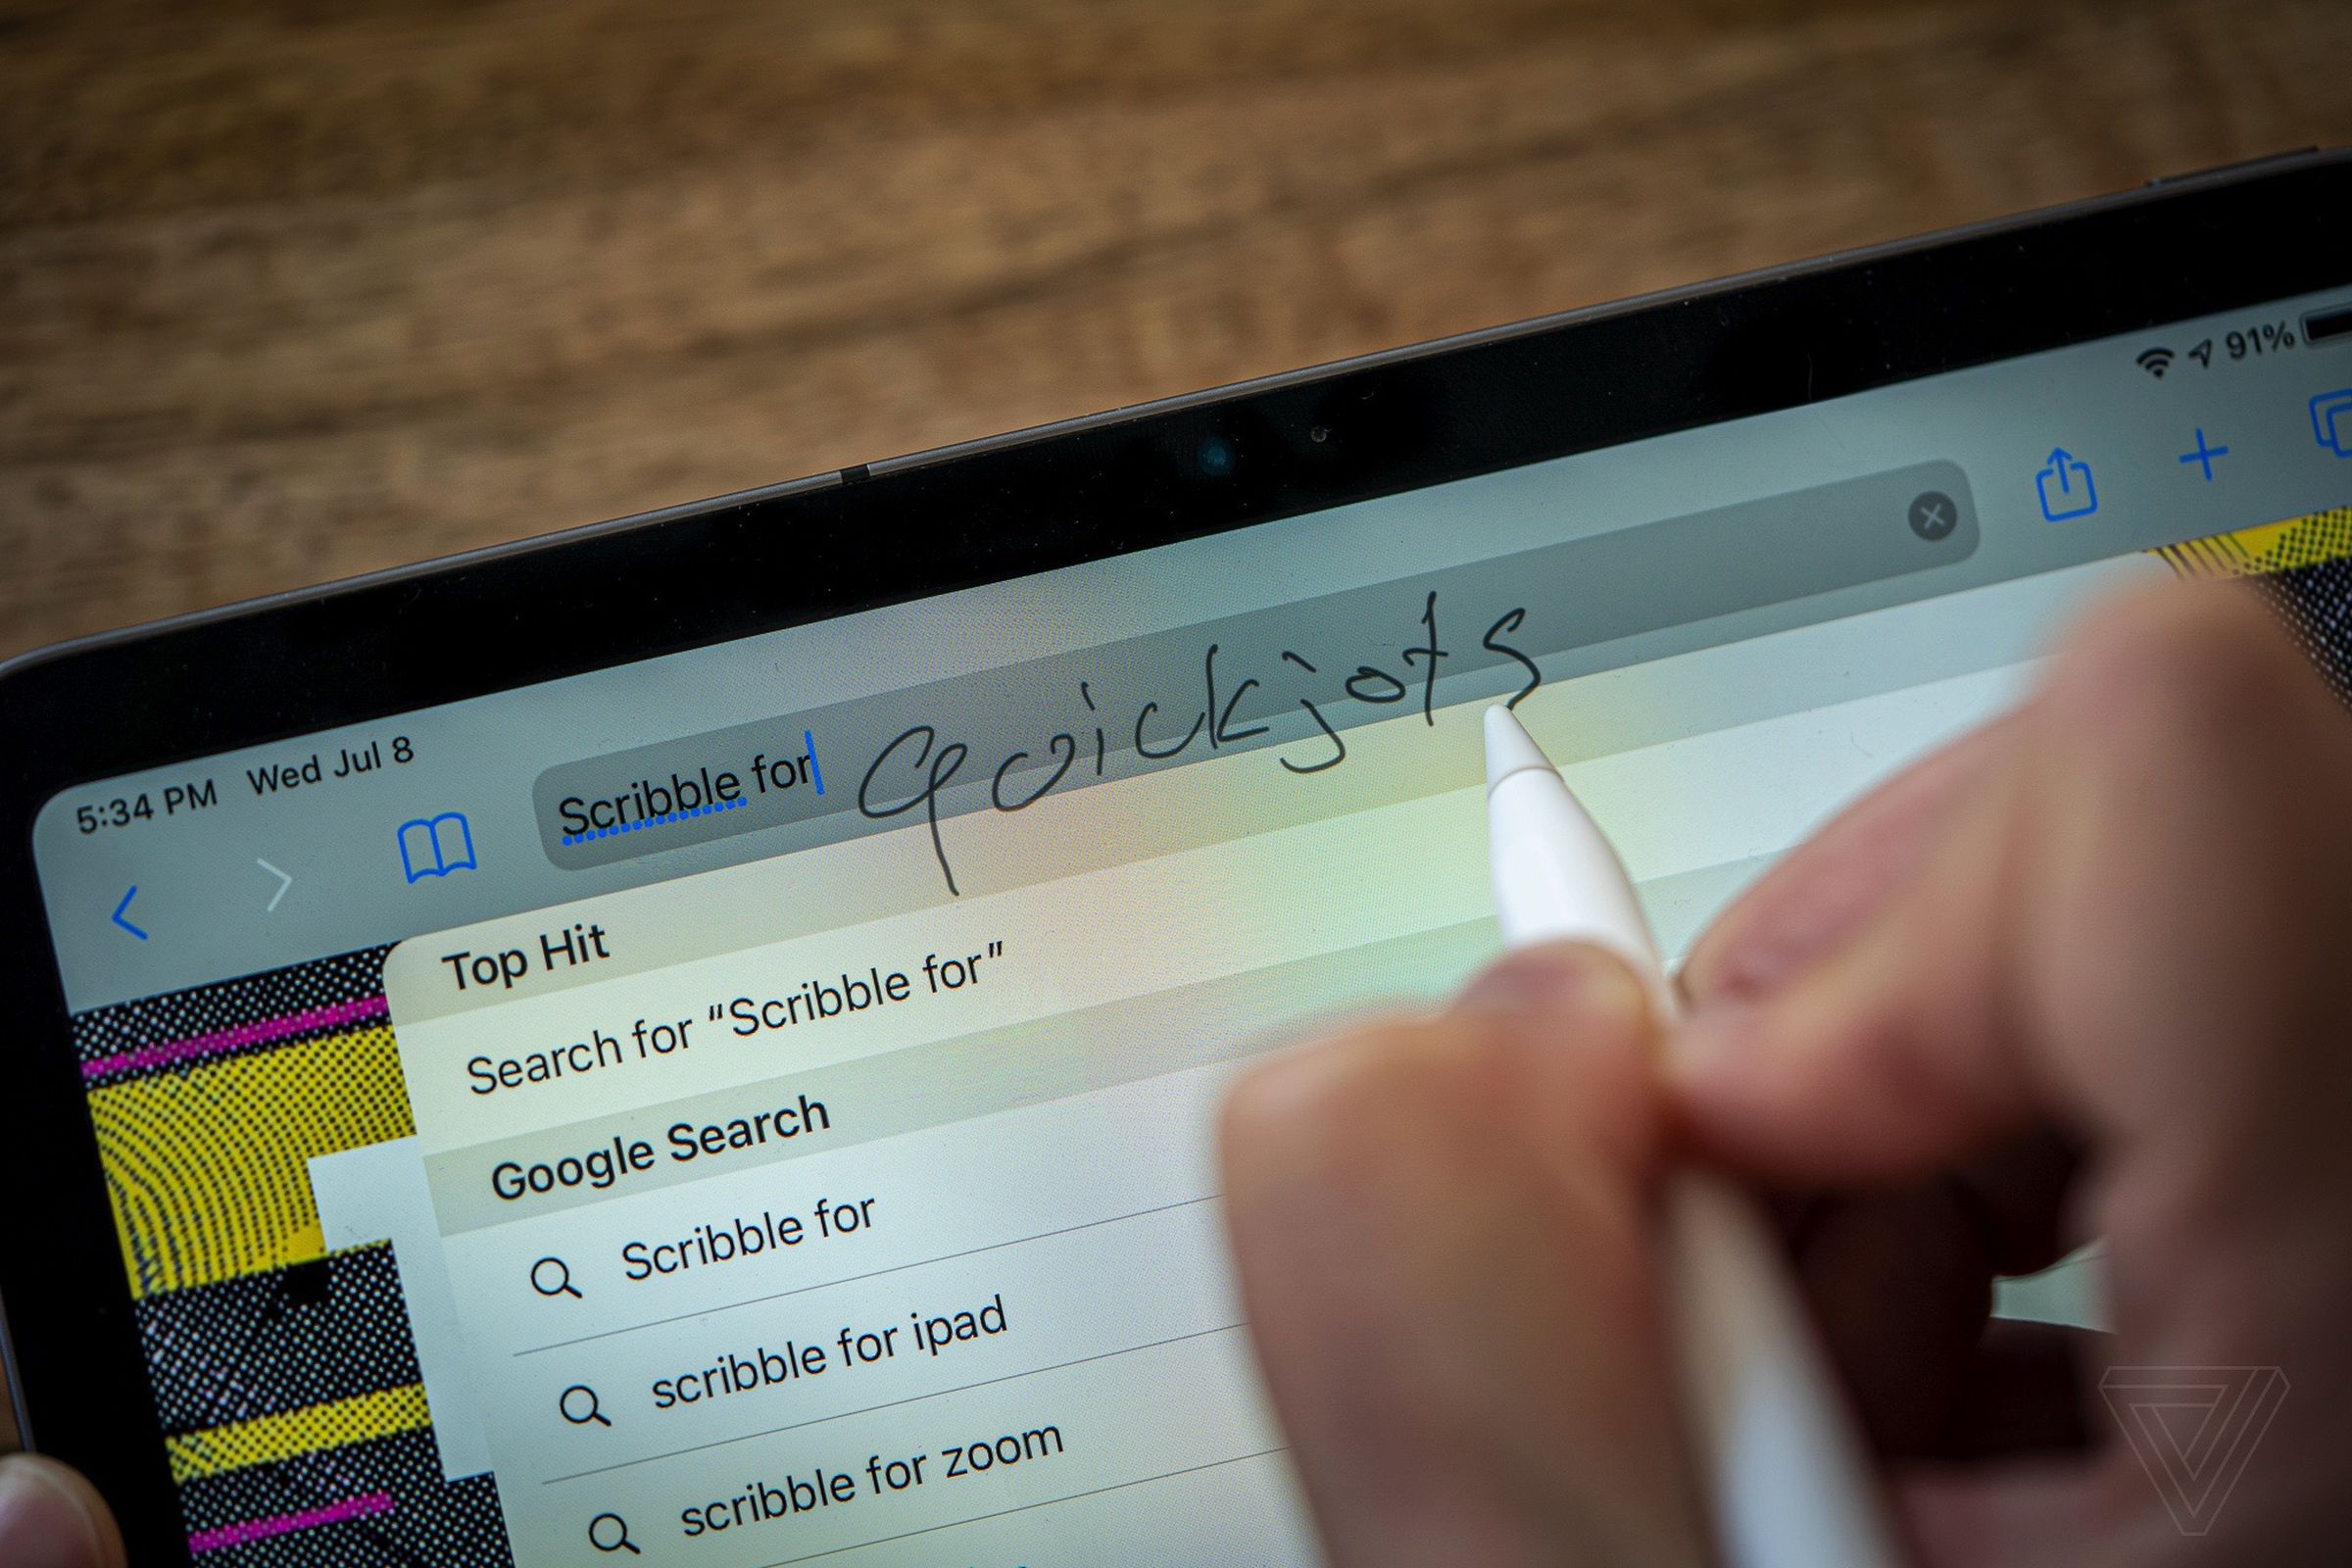 Scribble lets you jot down quick text, but it’s not great for longer writing